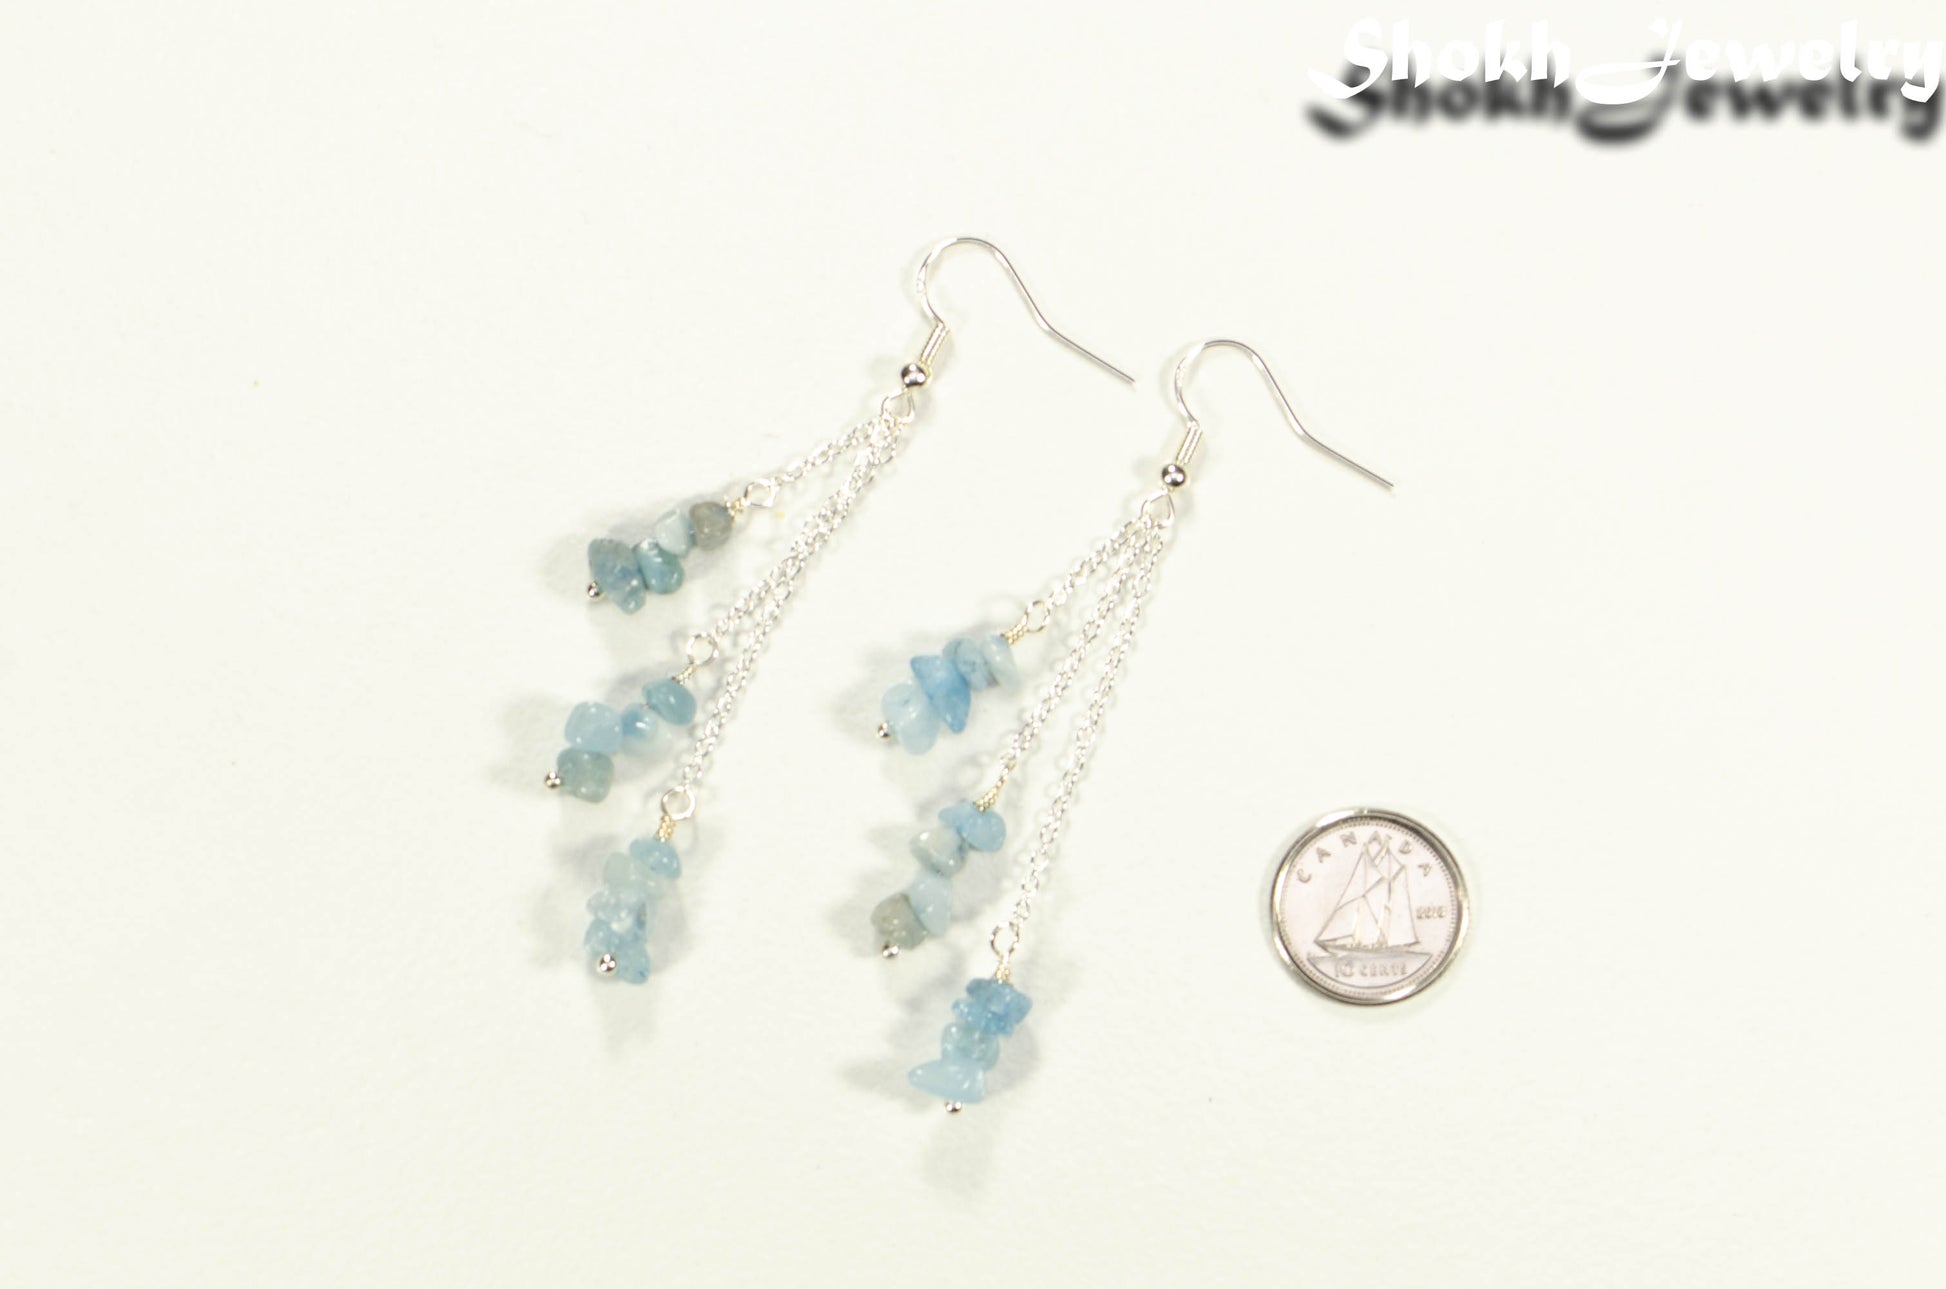 Long Silver Plated Chain and Aquamarine Crystal Chip Earrings beside a dime